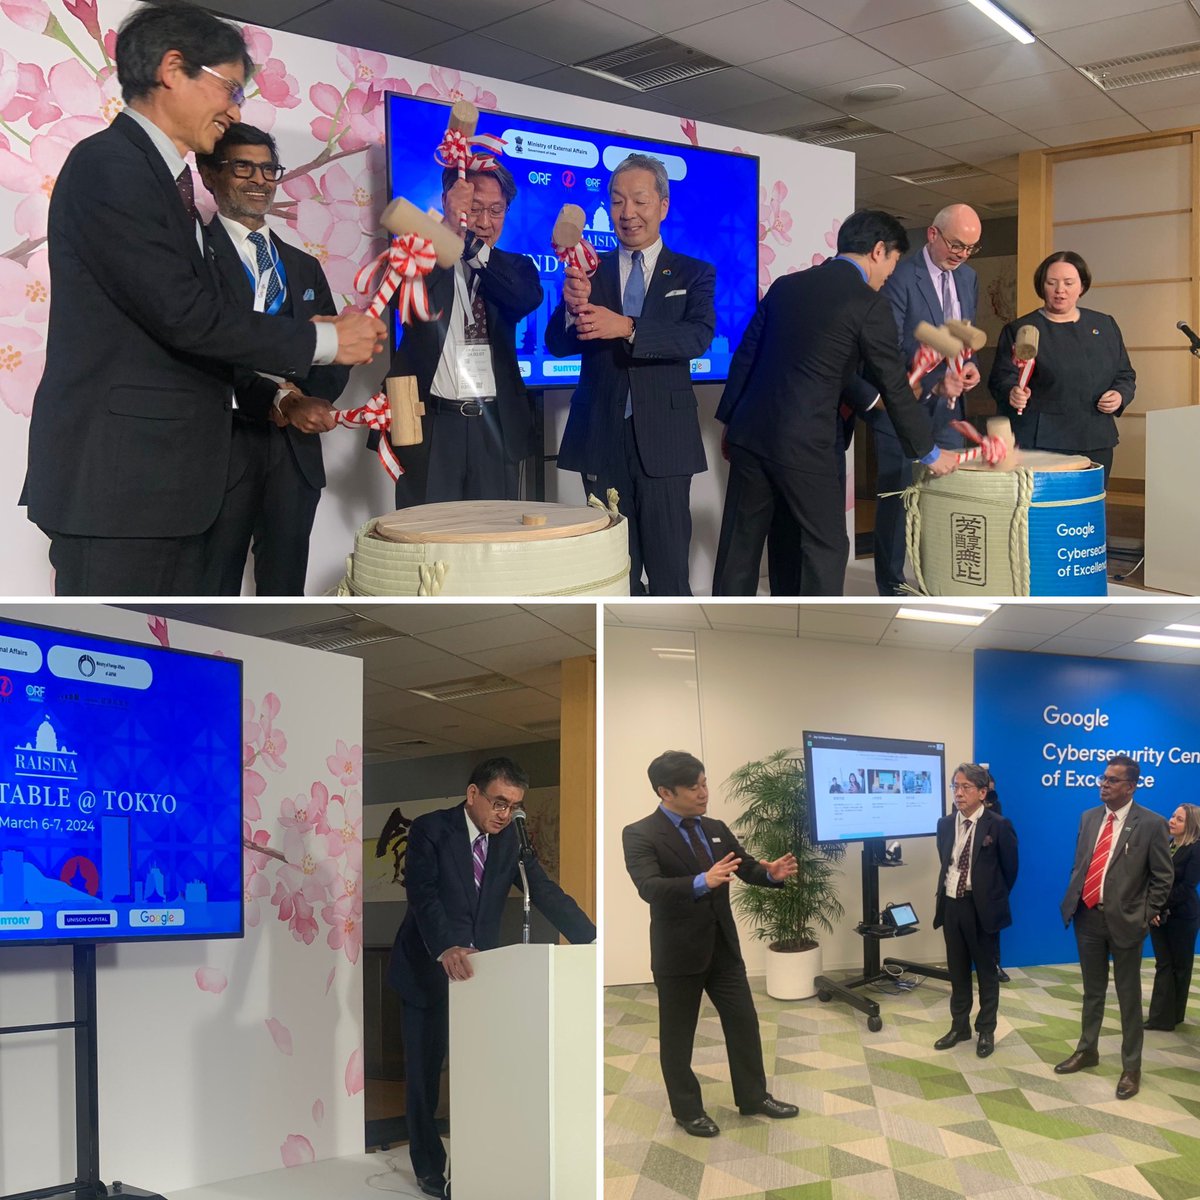 The Raisina Roundtable Tokyo concludes with the launch of Google’s Cybersecurity Center of Excellence, an address by Japan’s Minister for Digital Transformation @konotarogomame, and a tour for participants, including Deputy PM of Fiji @bimanprasad.